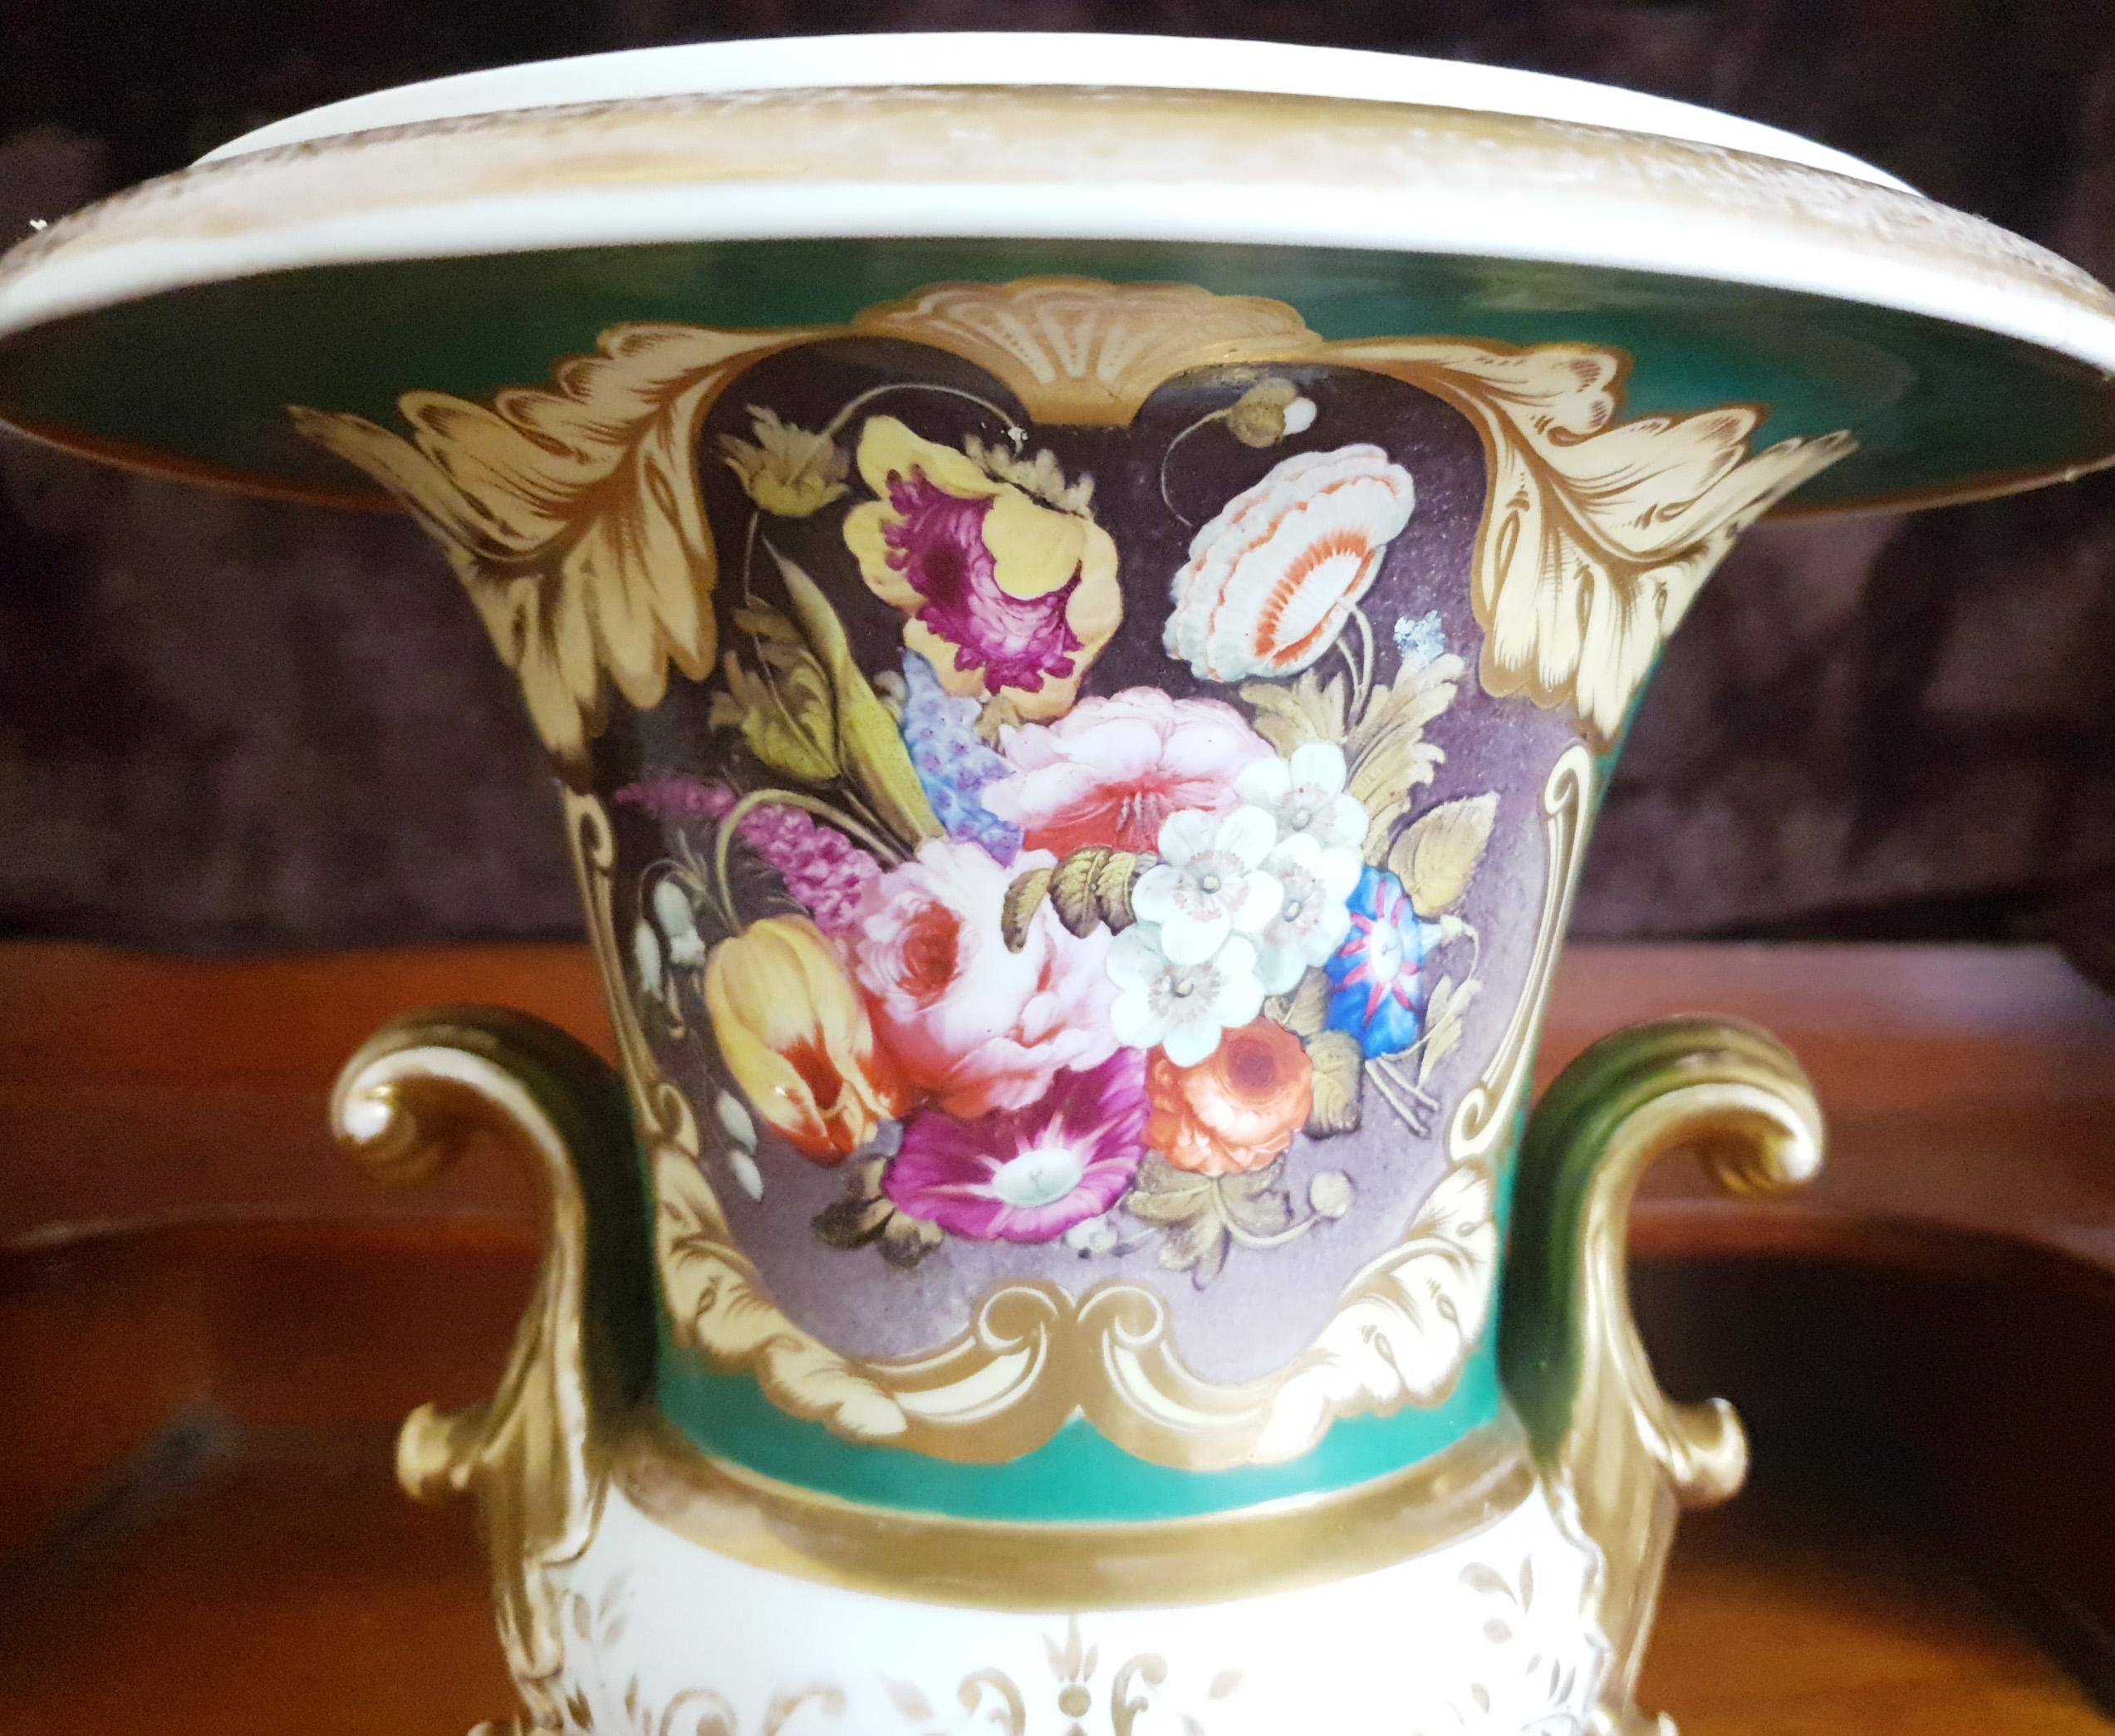 A lovely large Coalport Campana 19th century hand painted vase with gilt turned out handles. The front panel is covered in hand painted blooming summer flowers set within a gilt cartouche on a green ground. A yellow tulip, primulas, pink roses,